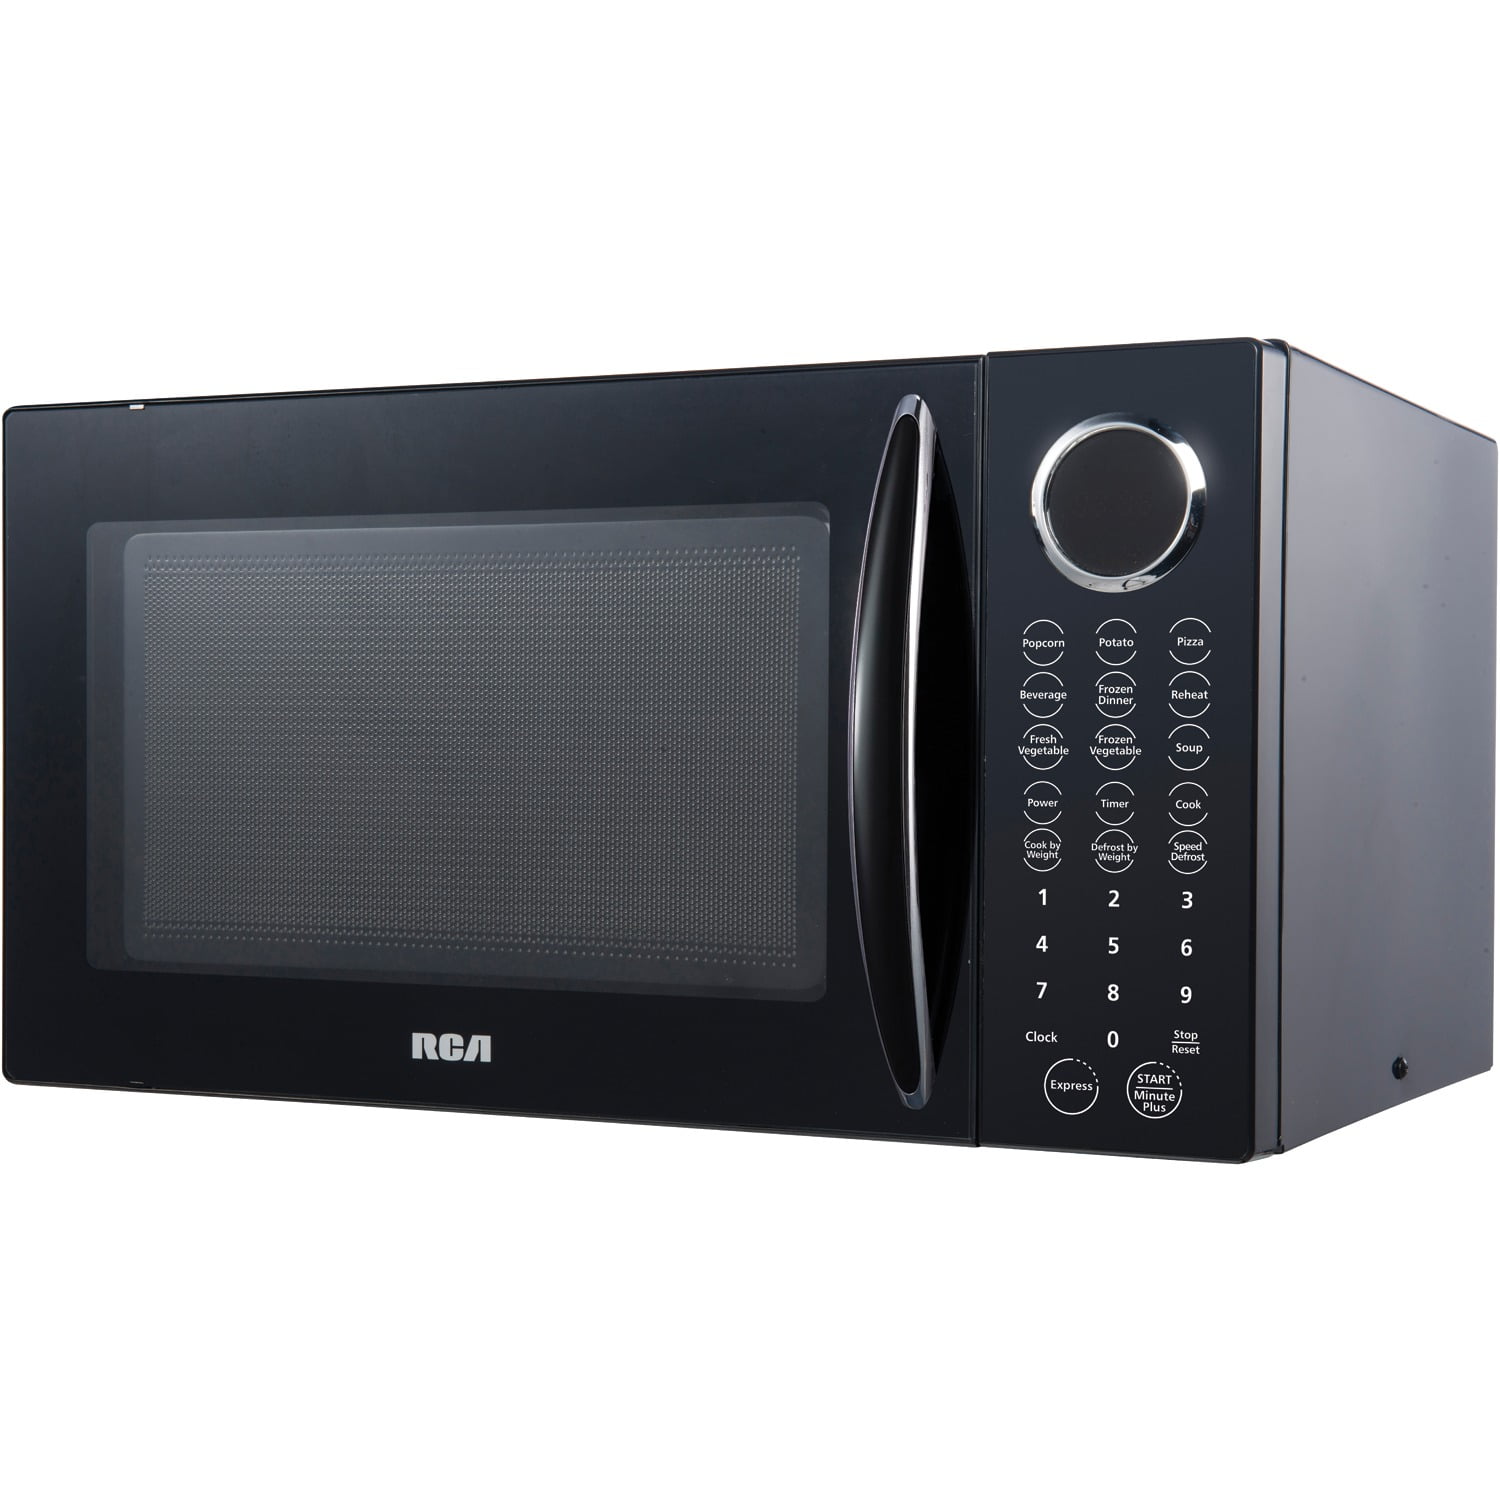 RCA 0.7 cu. ft. Countertop Microwave in Black RMW733-BLACK - The Home Depot